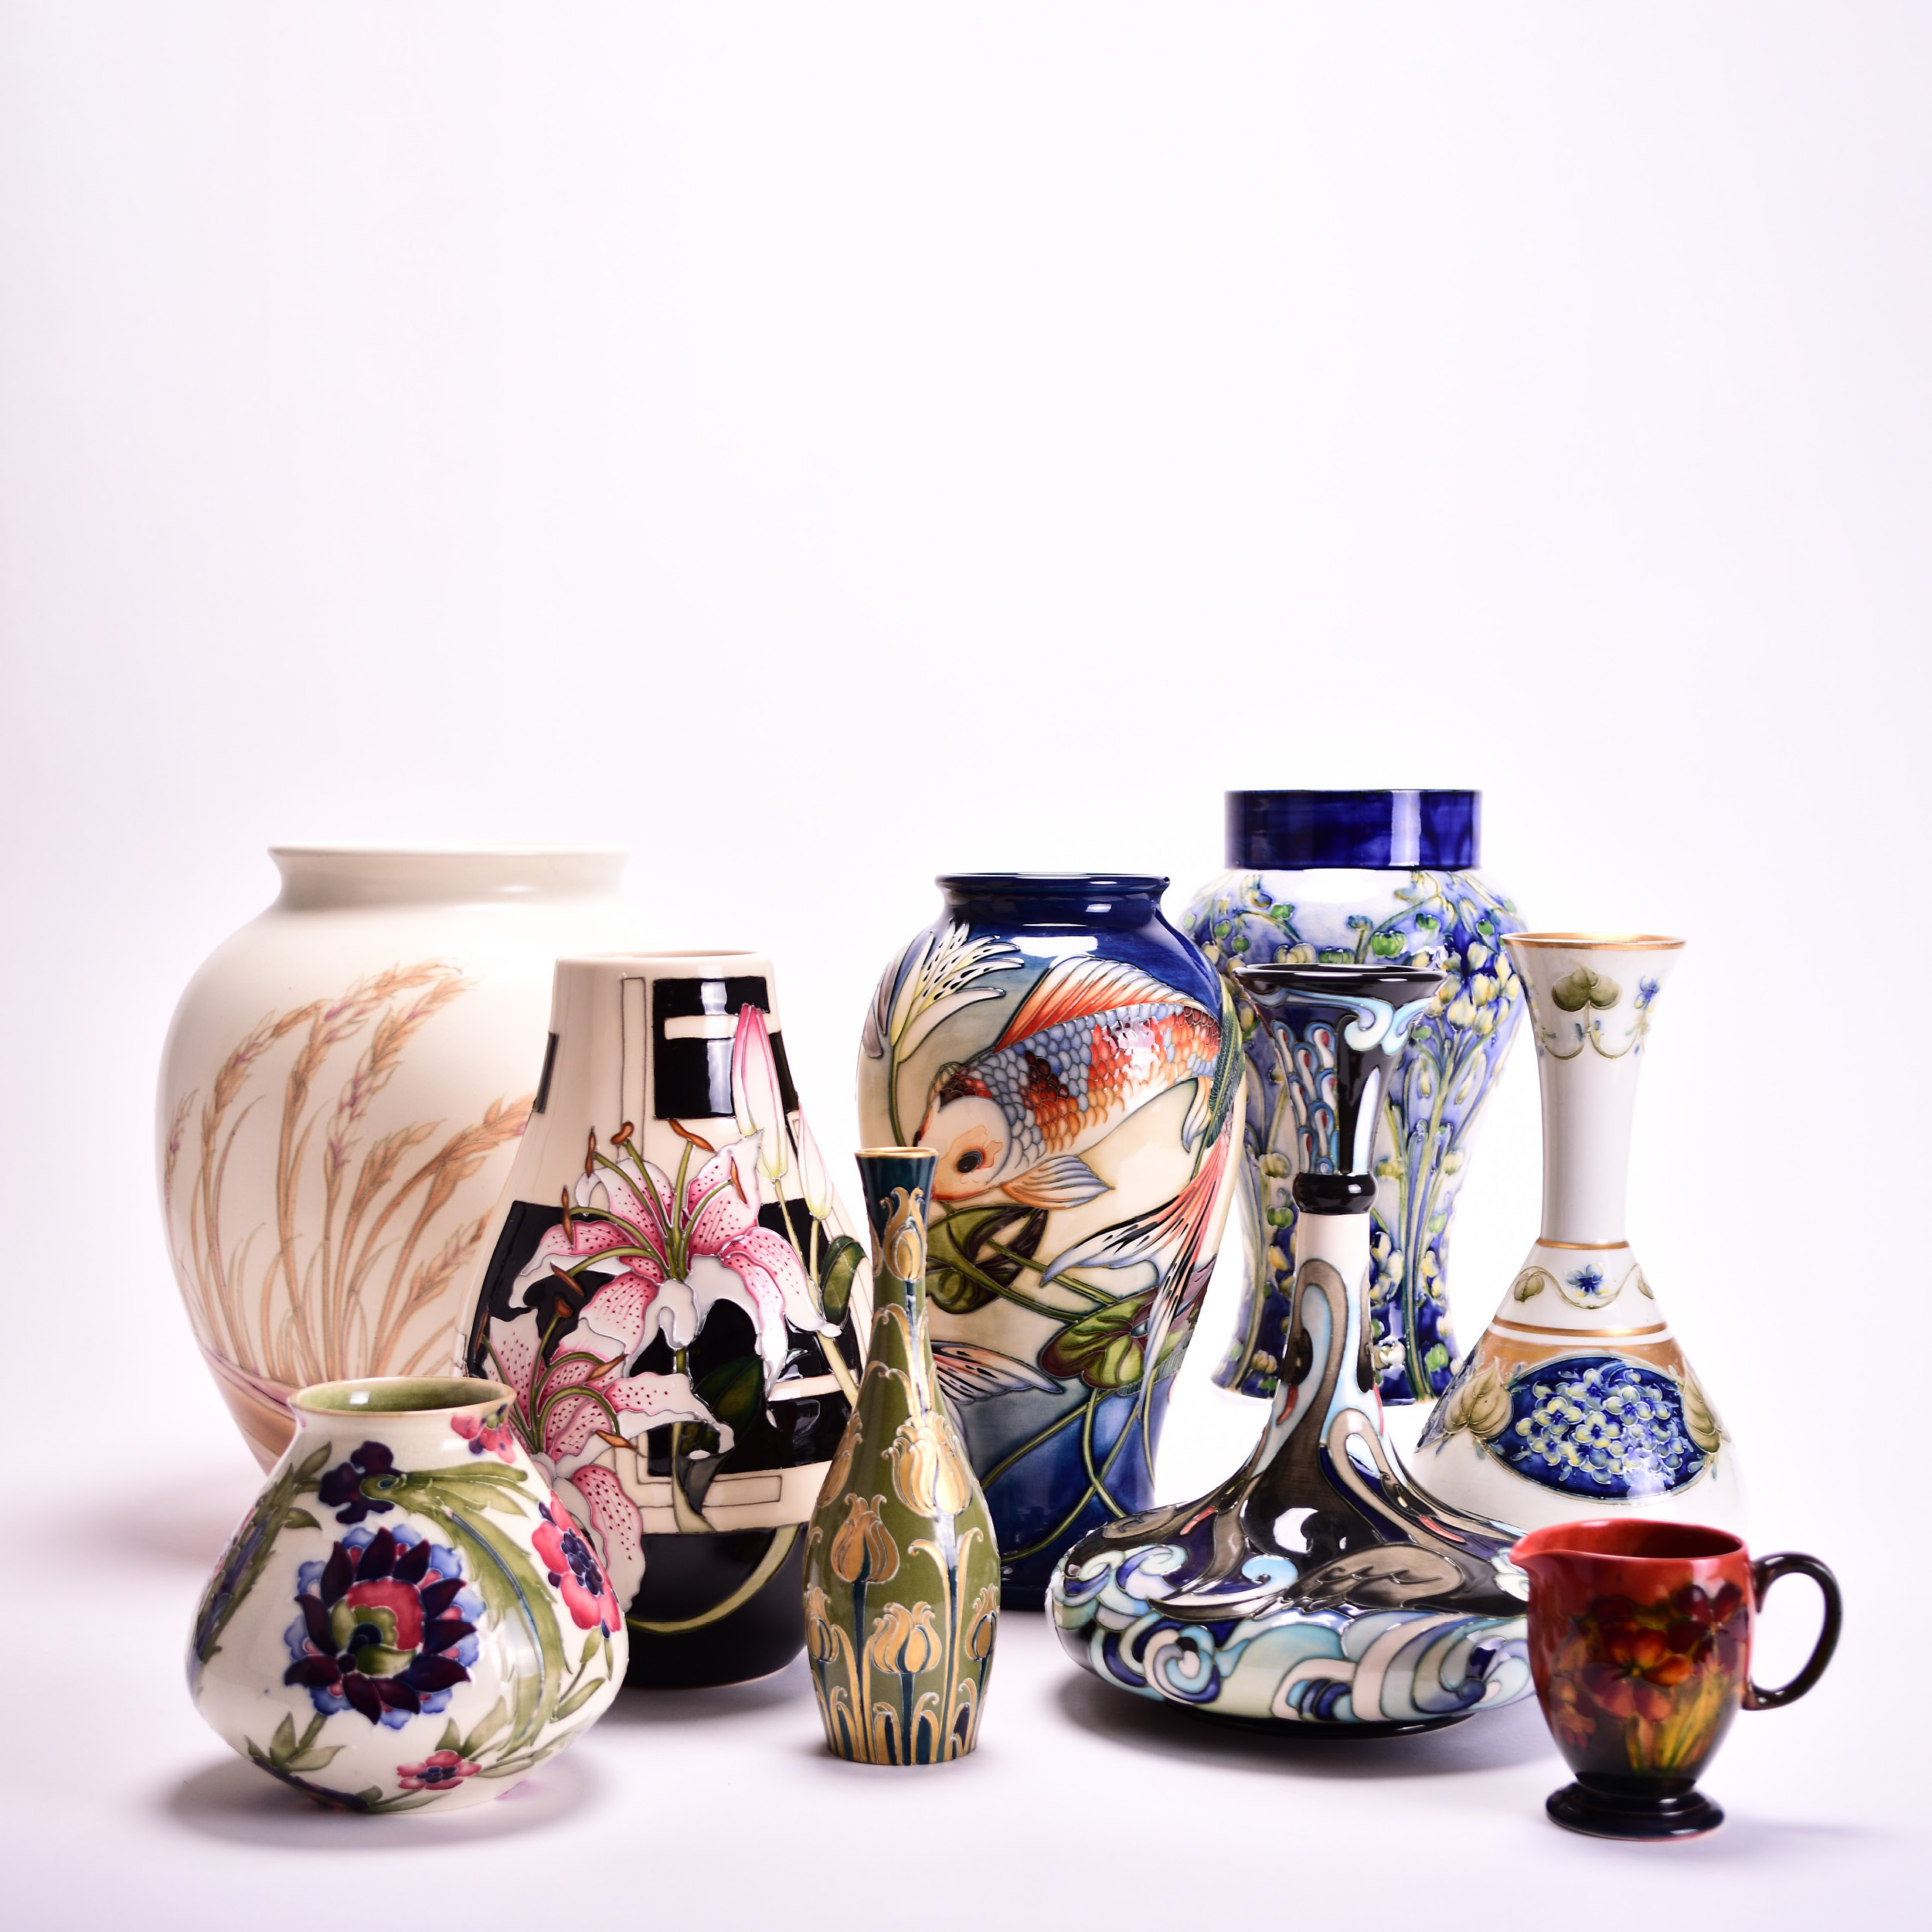 Pictures, Ceramics, Collectables and Modern Design Auction